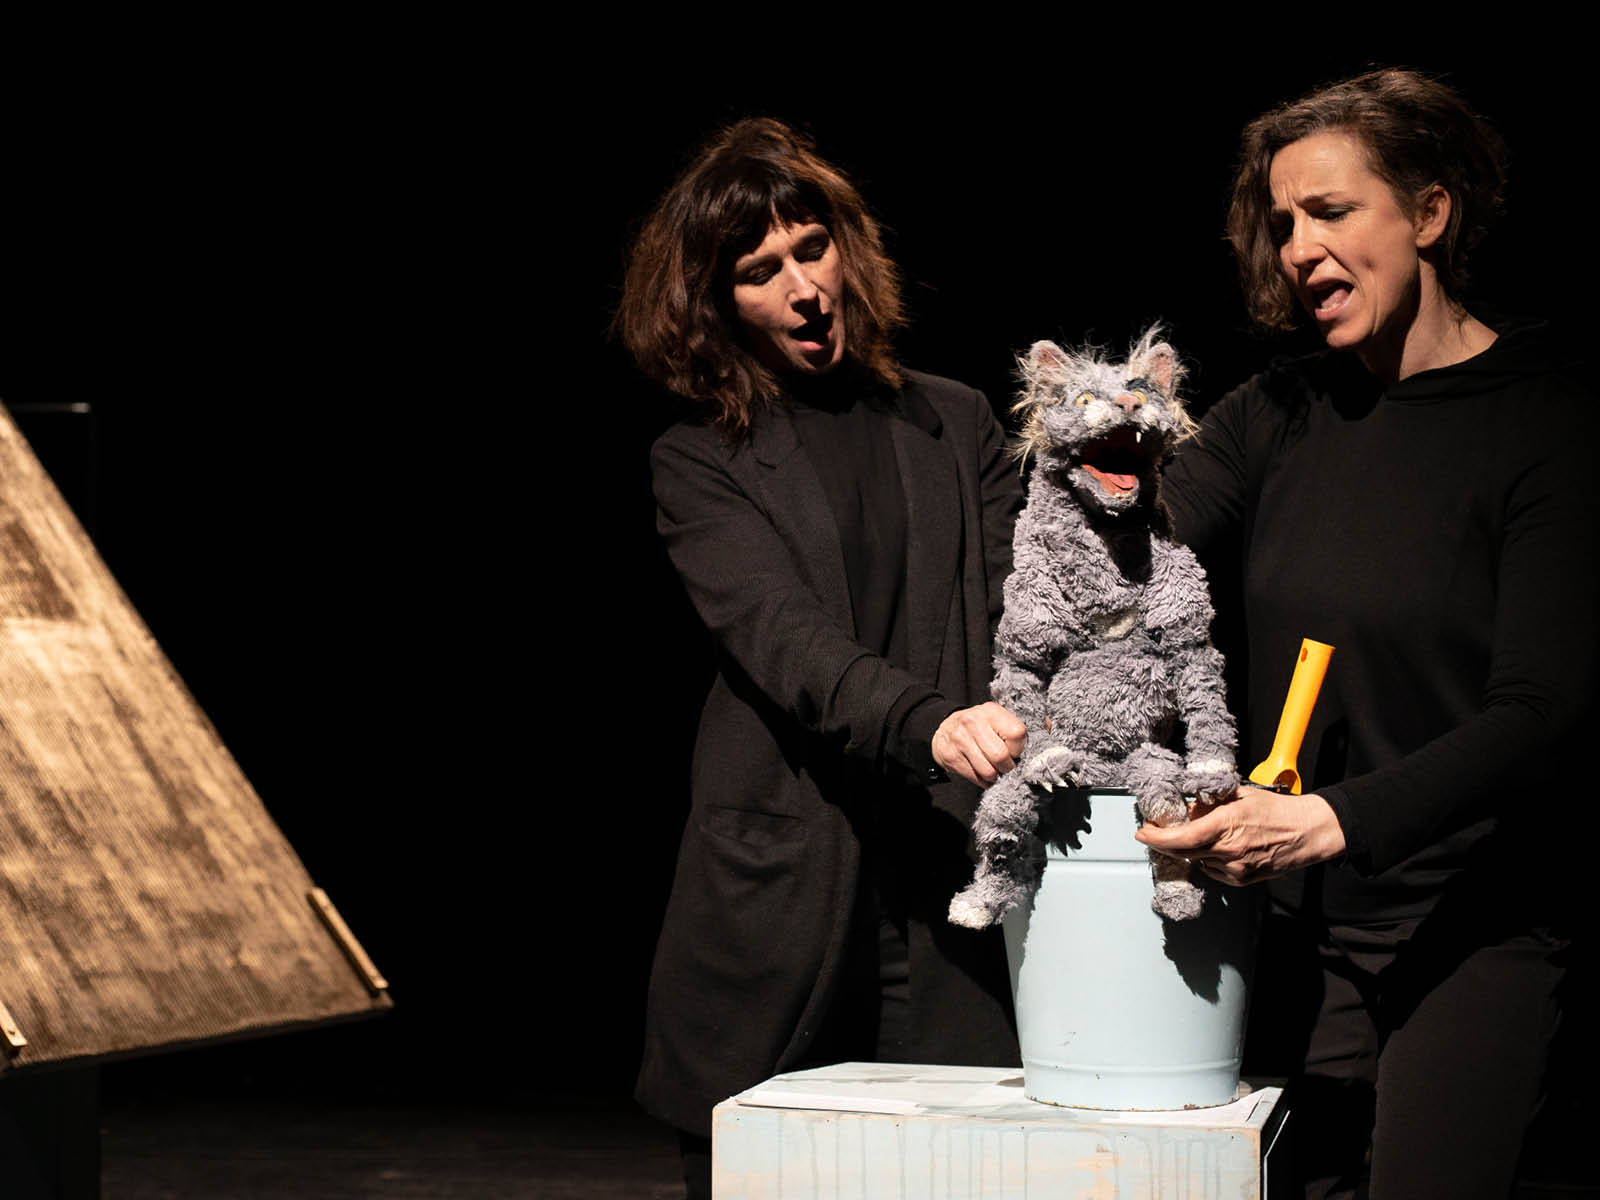 Two puppeteers dressed in black hold the puppet of a cat in their hands. The cat has its mouth wide open and is singing. It is sitting on an upturned metal bucket.